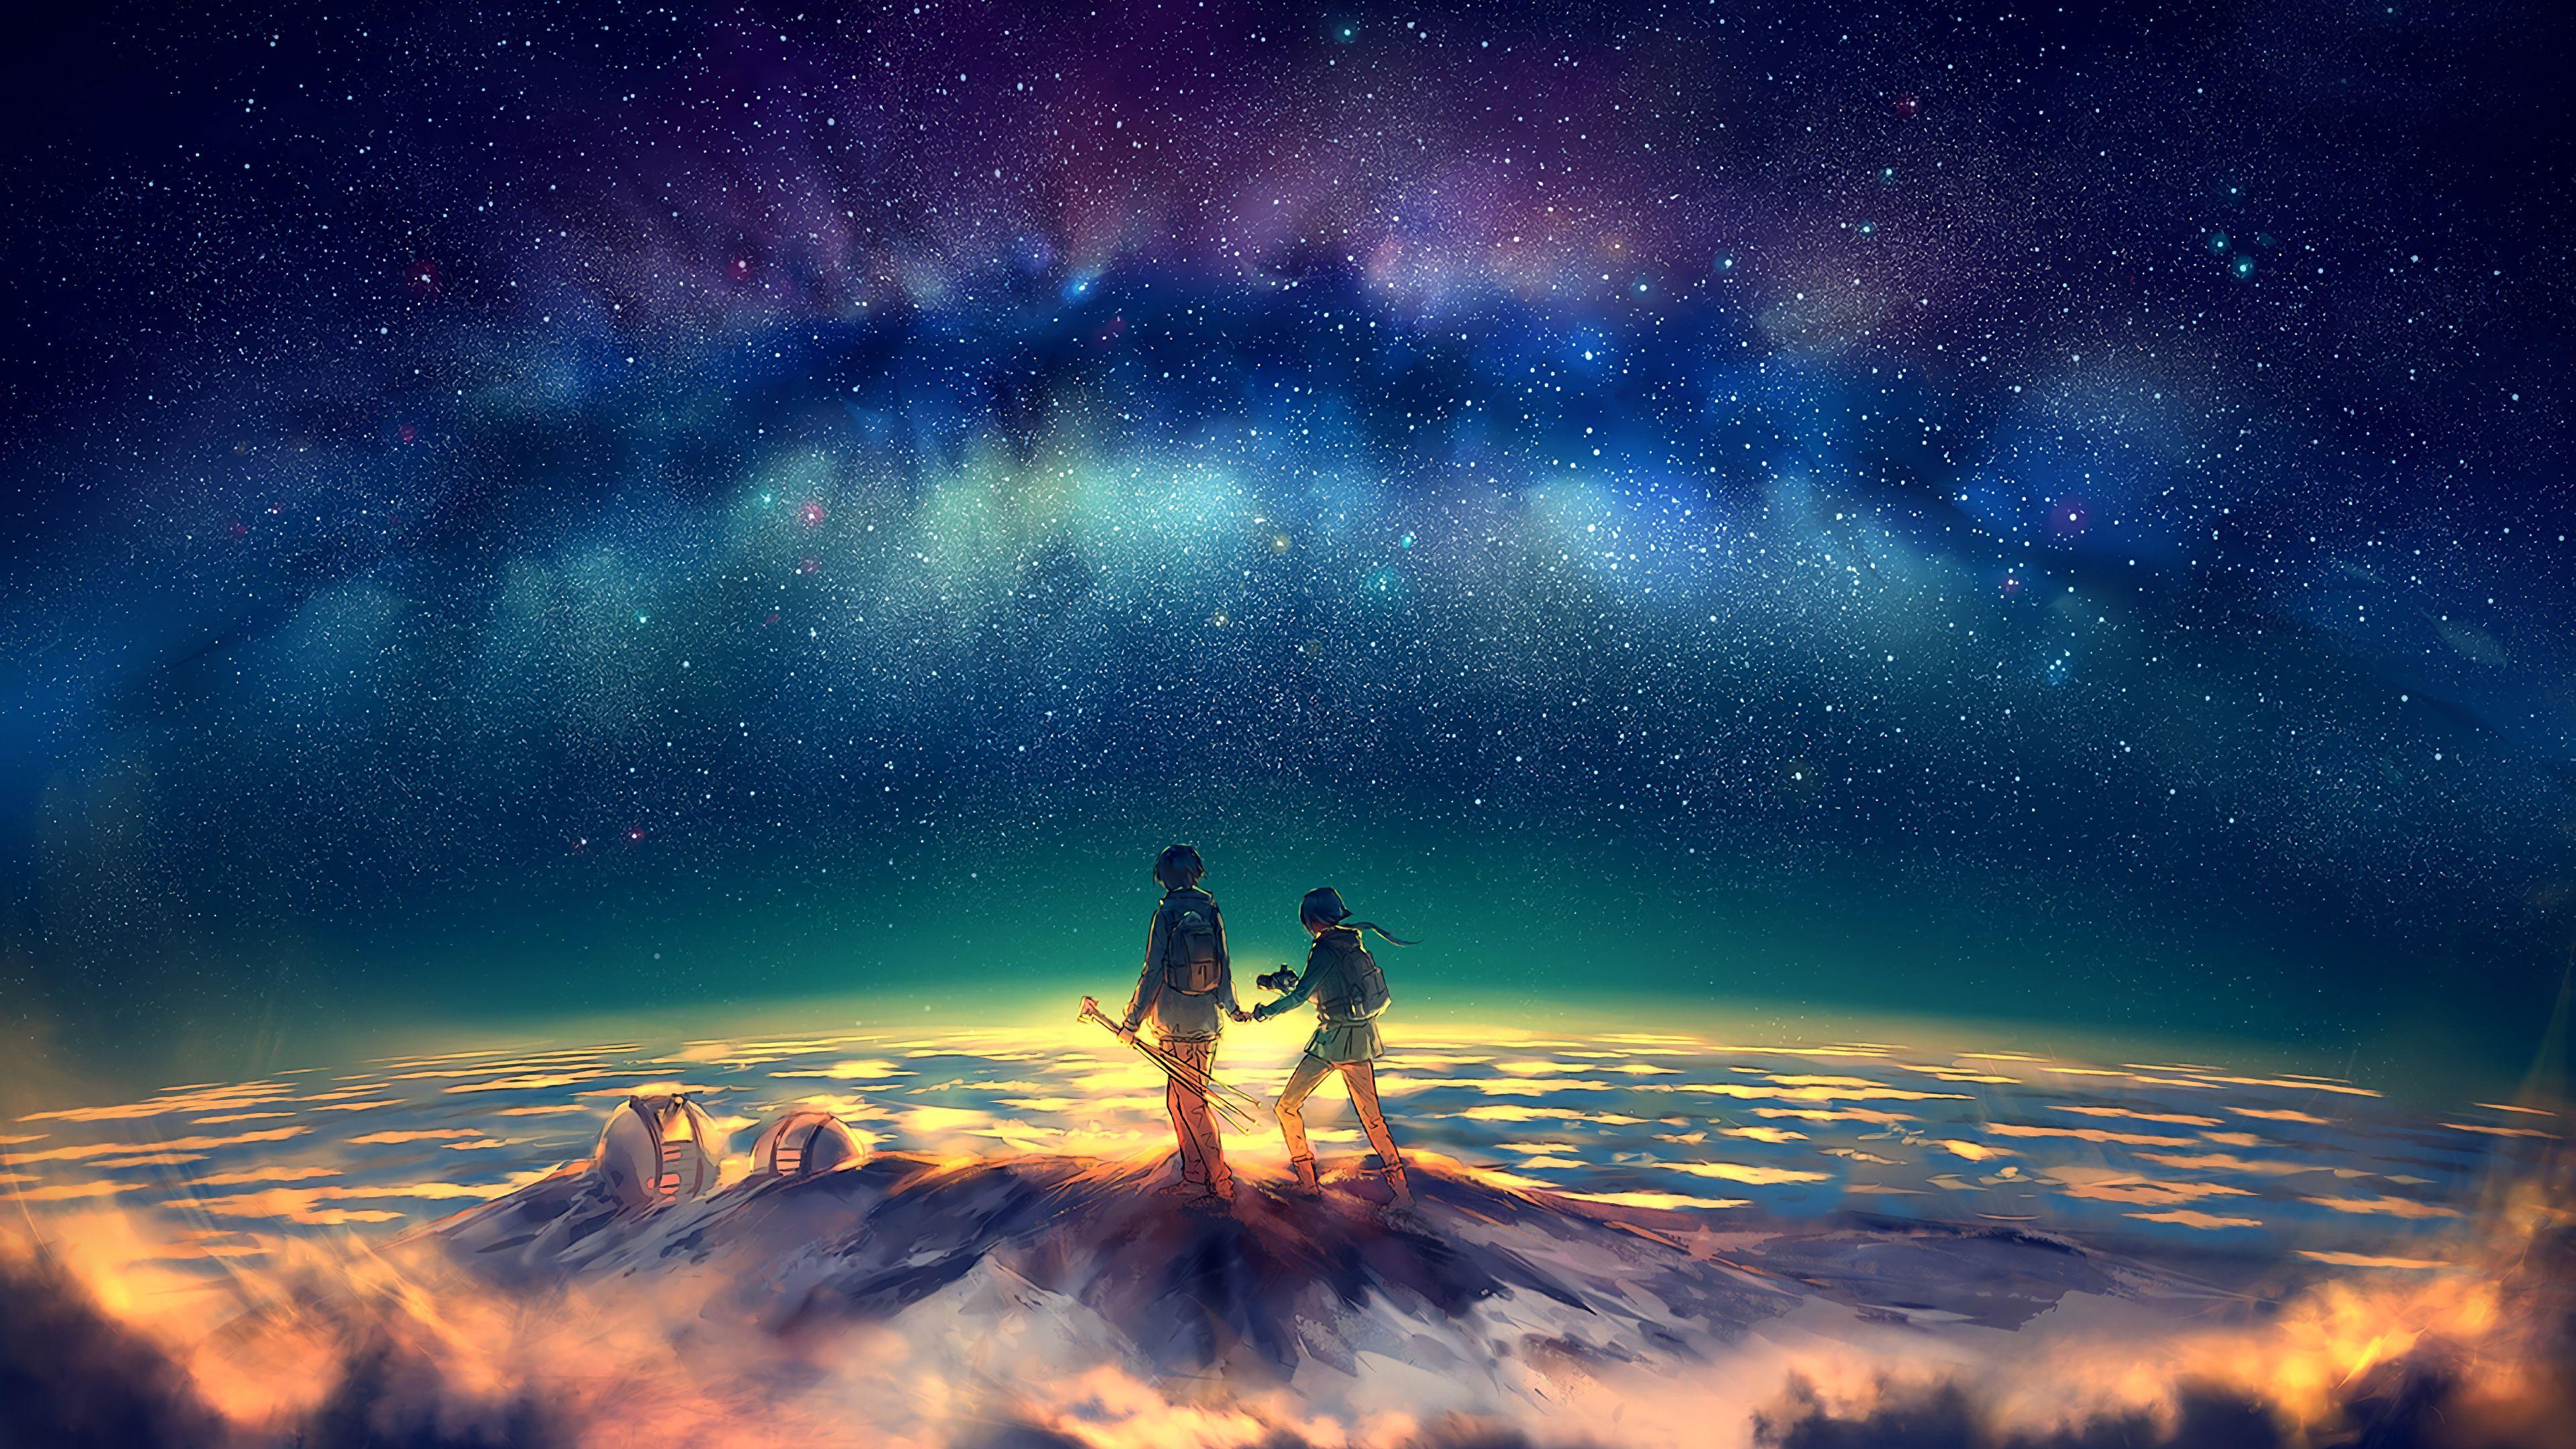 Download wallpaper 3840x2400 piano silhouette space illusion anime 4k  ultra hd 1610 hd background